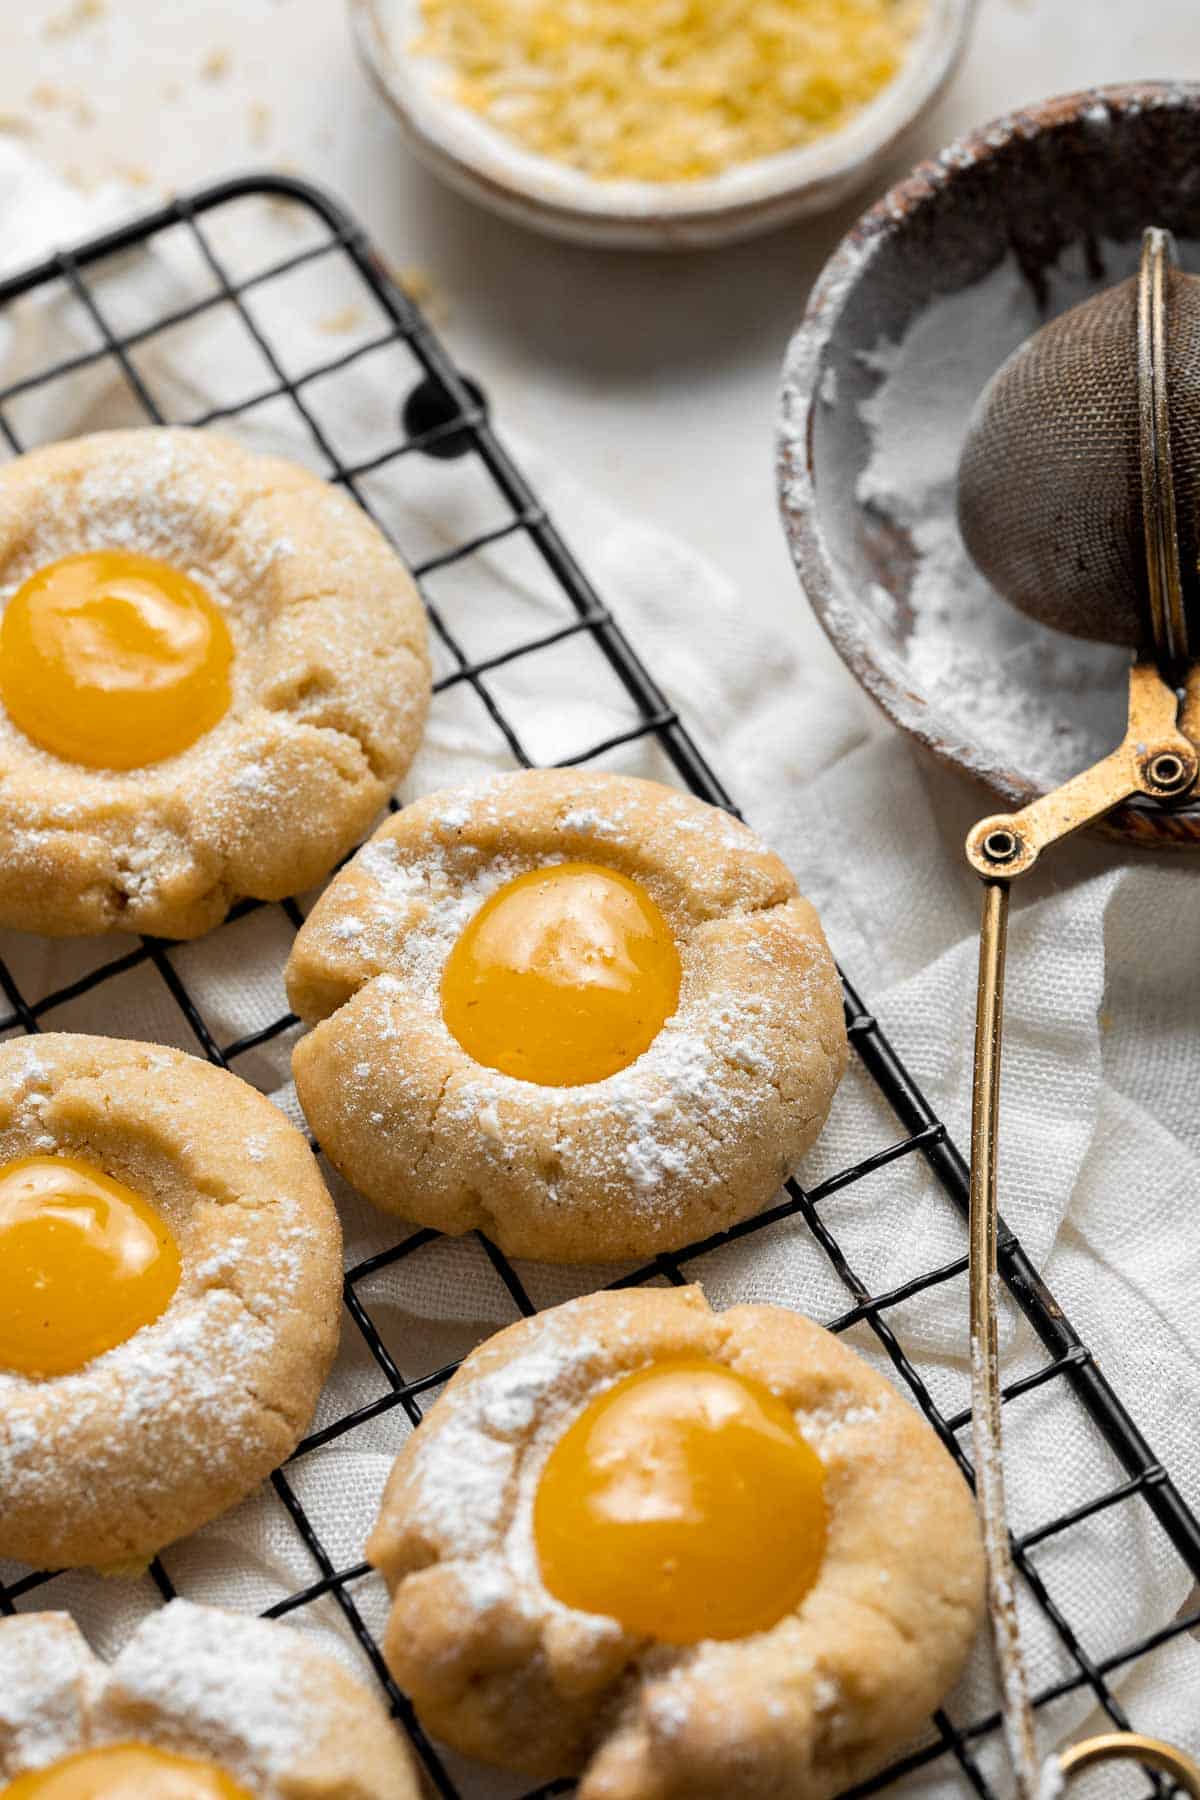 Sweet and sour Lemon Curd Cookies are made of buttery shortbread thumbprint cookies dusted with powdered sugar, and filled with sweet and tangy lemon curd. | aheadofthyme.com